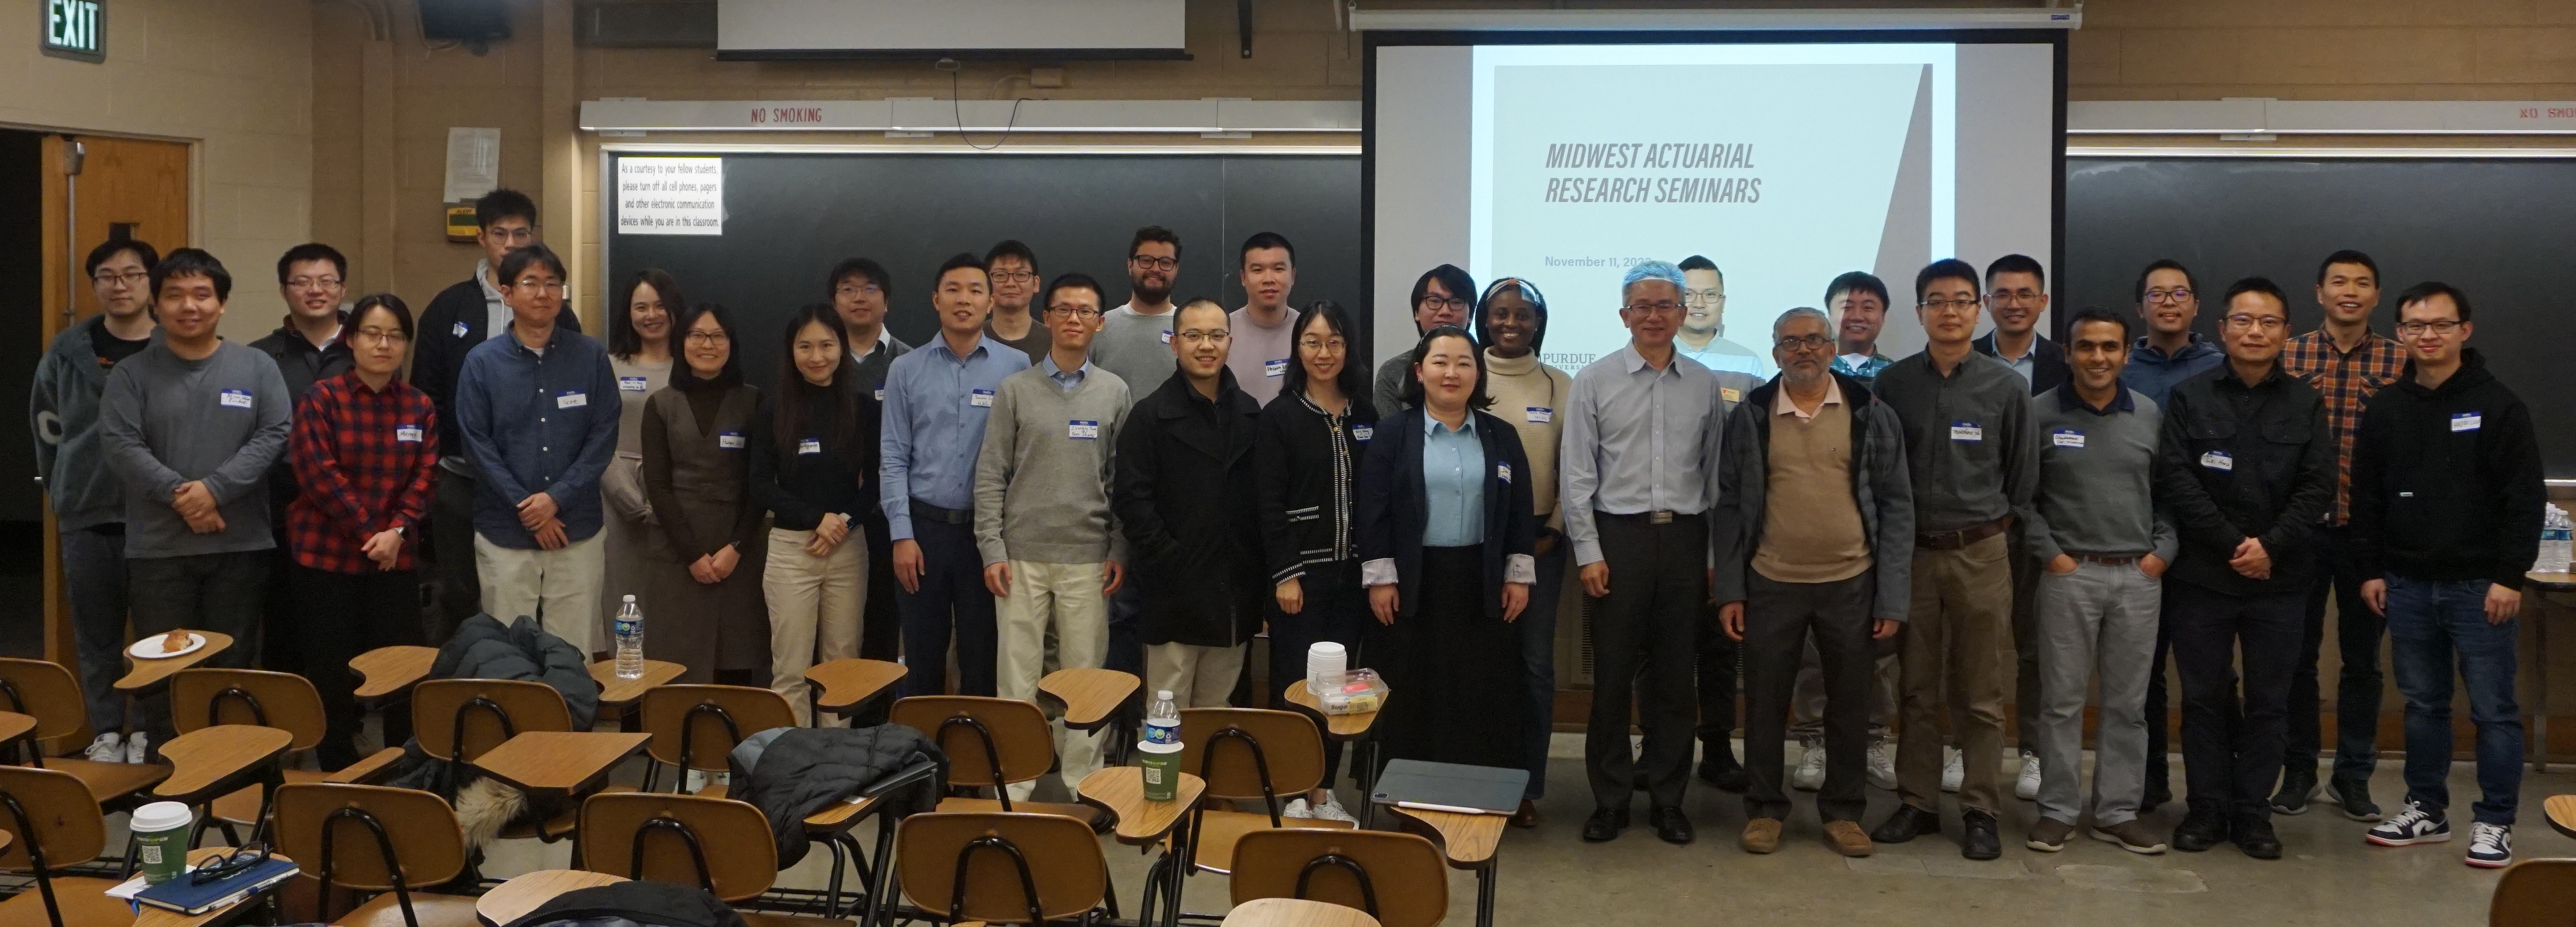 Seminar attendees for the Midwest Actuarial Research Seminar.